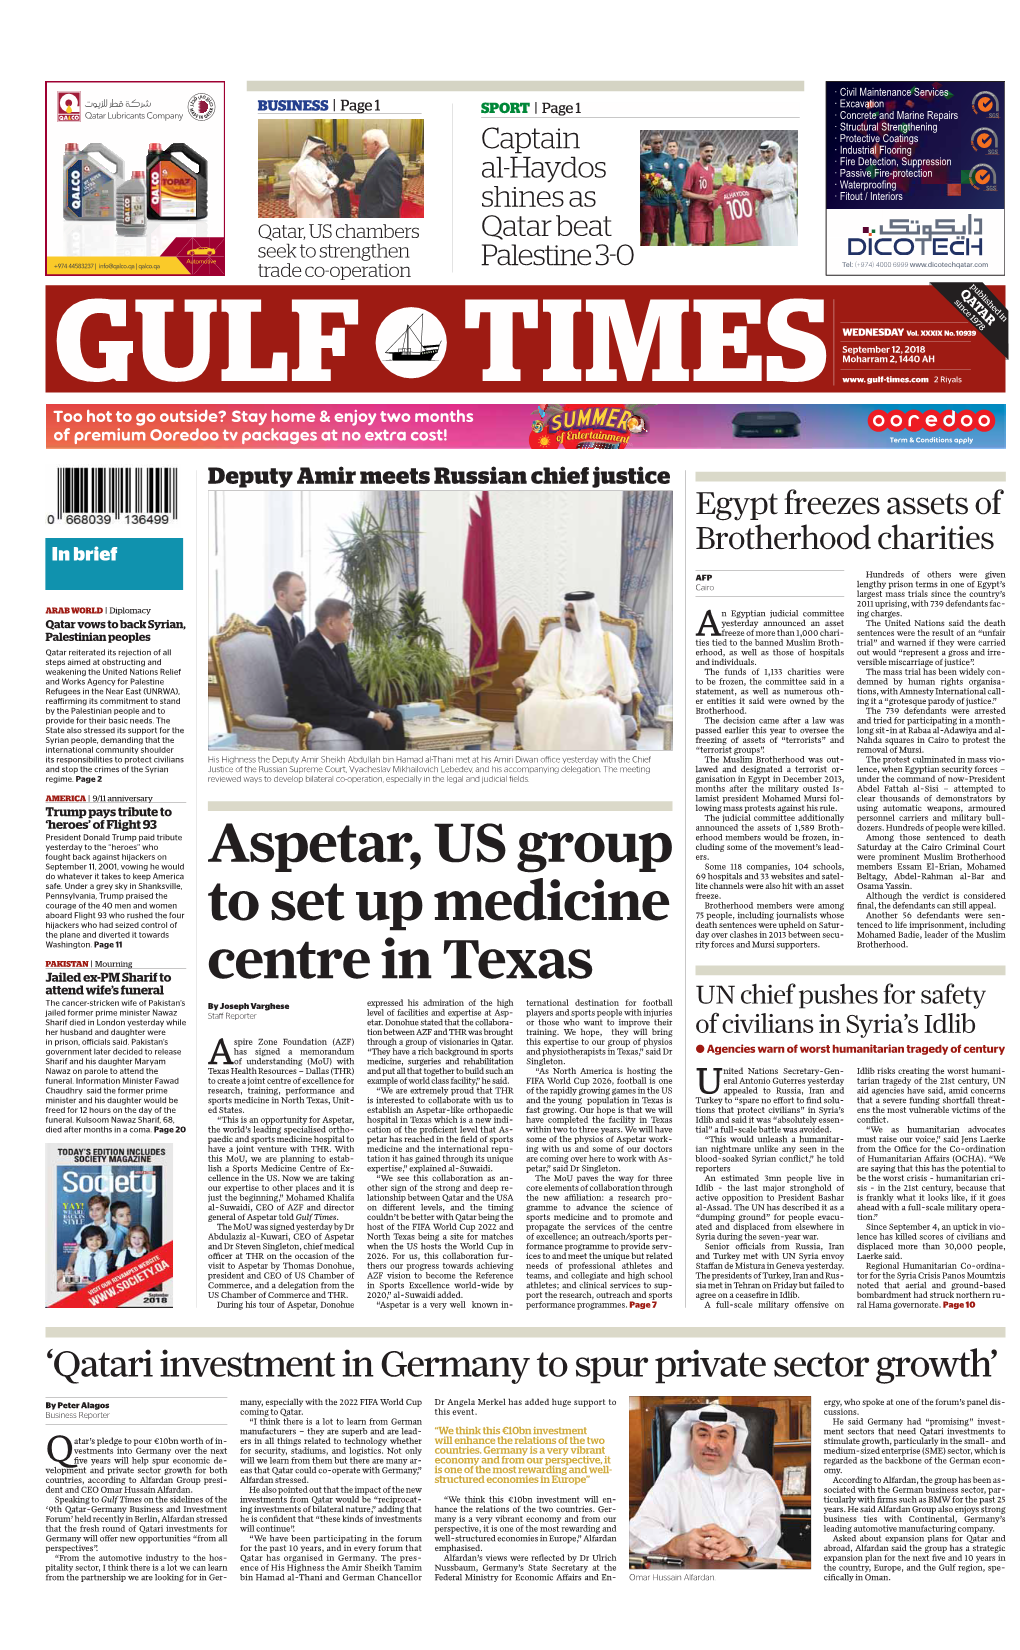 Aspetar, US Group to Set up Medicine Centre in Texas